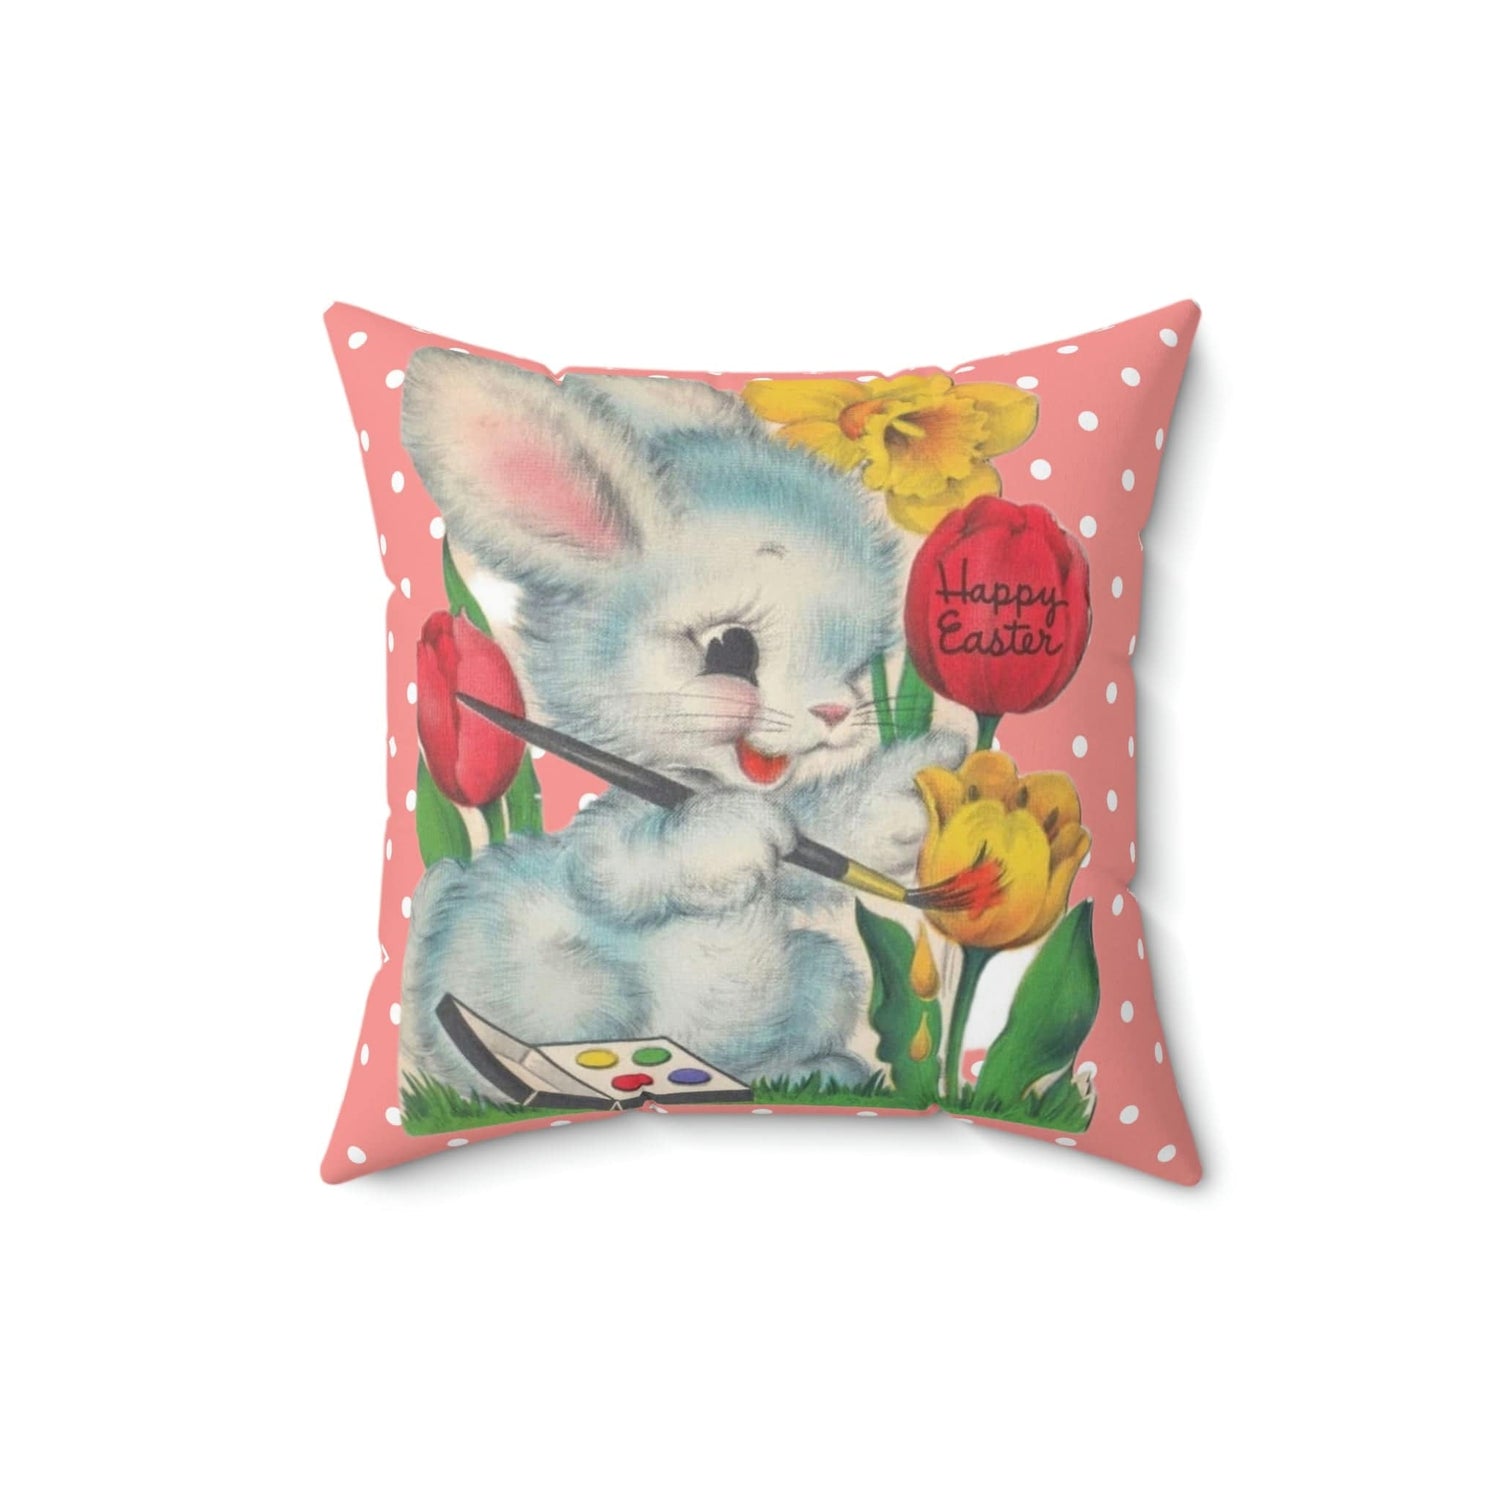 Vintage Easter Card Anthropomorphic Bunny, Happy Easter, Tulips, Kitschy Cute Easter Bunny Artist, Retro Spring Pillow And Insert Home Decor